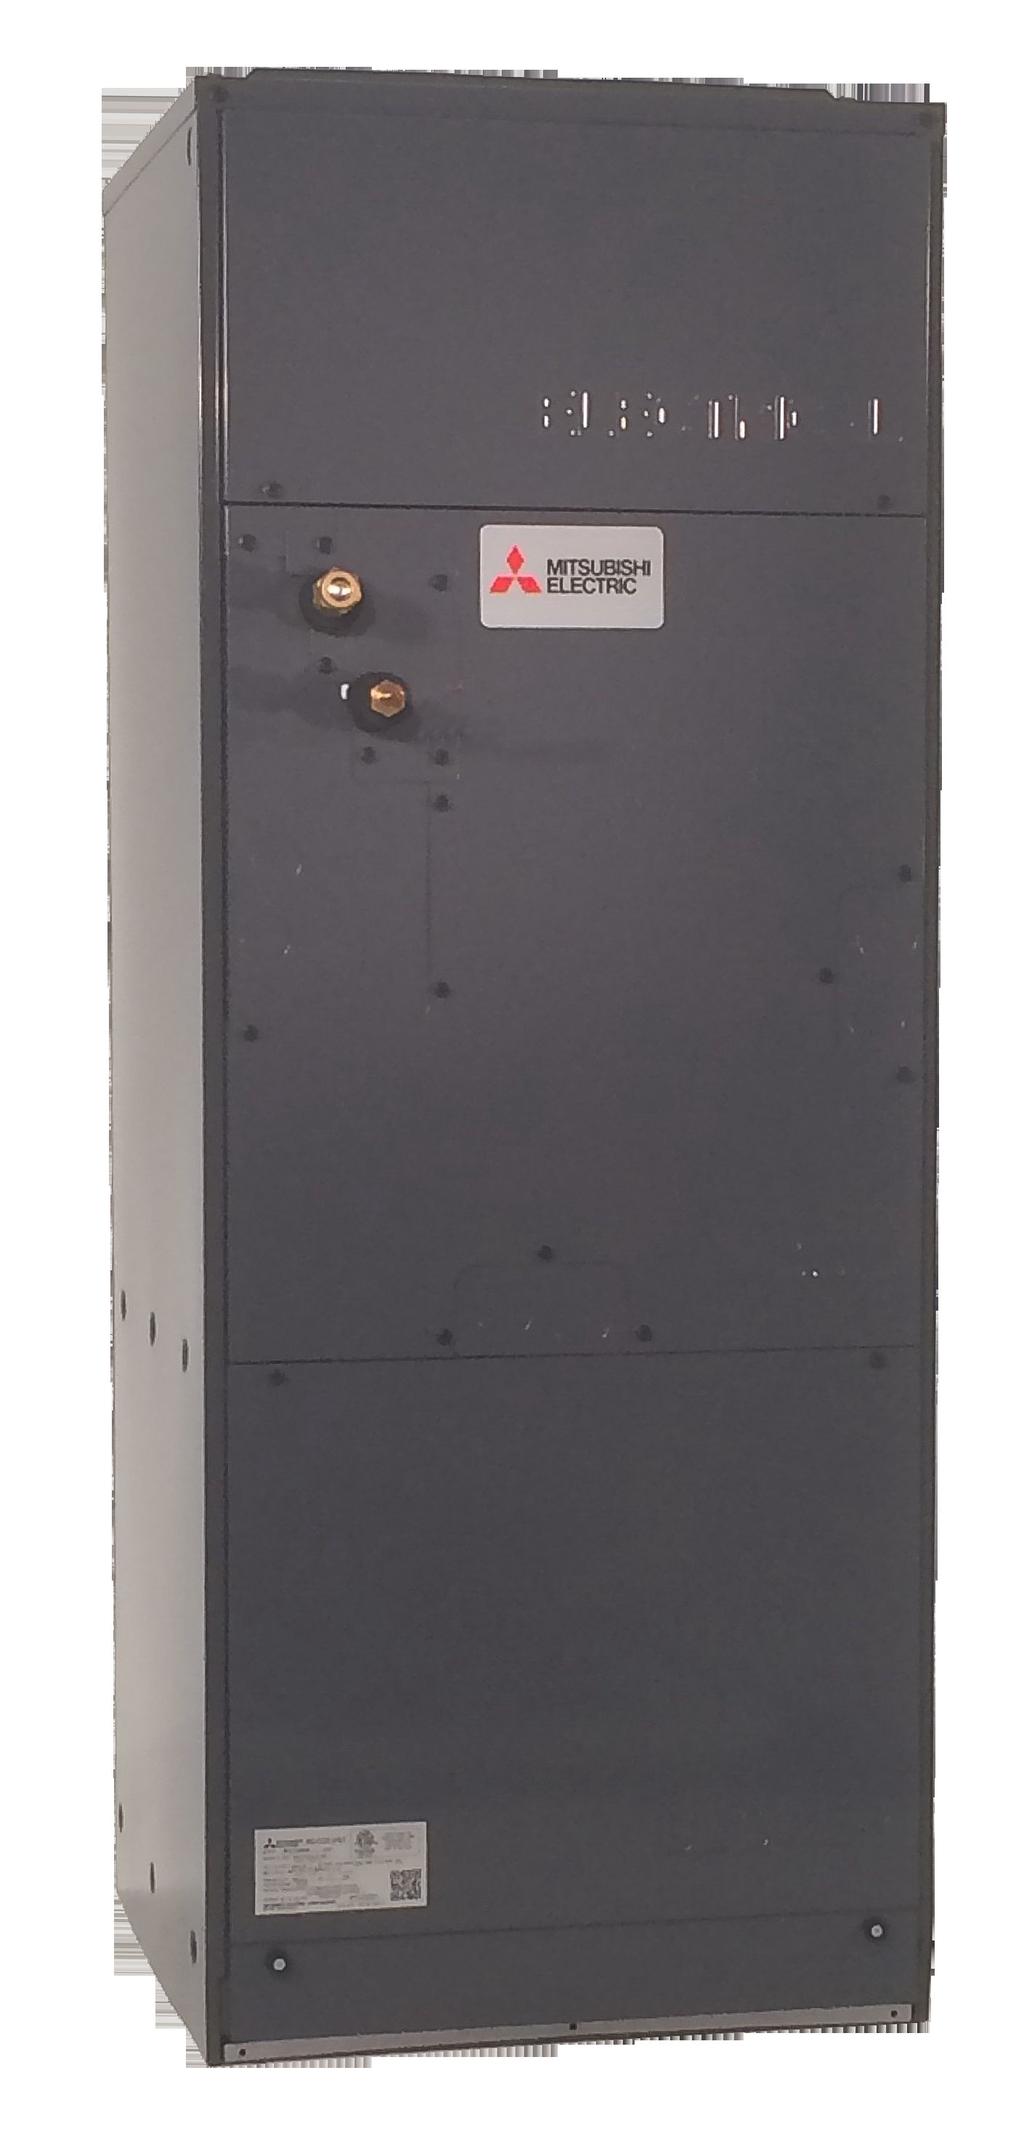 P-SERIES SUBMITTAL DATA: PVA-A36AA7 & PUY-A36NKA7(-BS) 36,000 BTU/H AIR HANDLER AIR-CONDITIONING SYSTEM Job Name: System Reference: Date: Indoor Unit: Outdoor Unit: PVA-A36AA7 PUY-A36NKA7